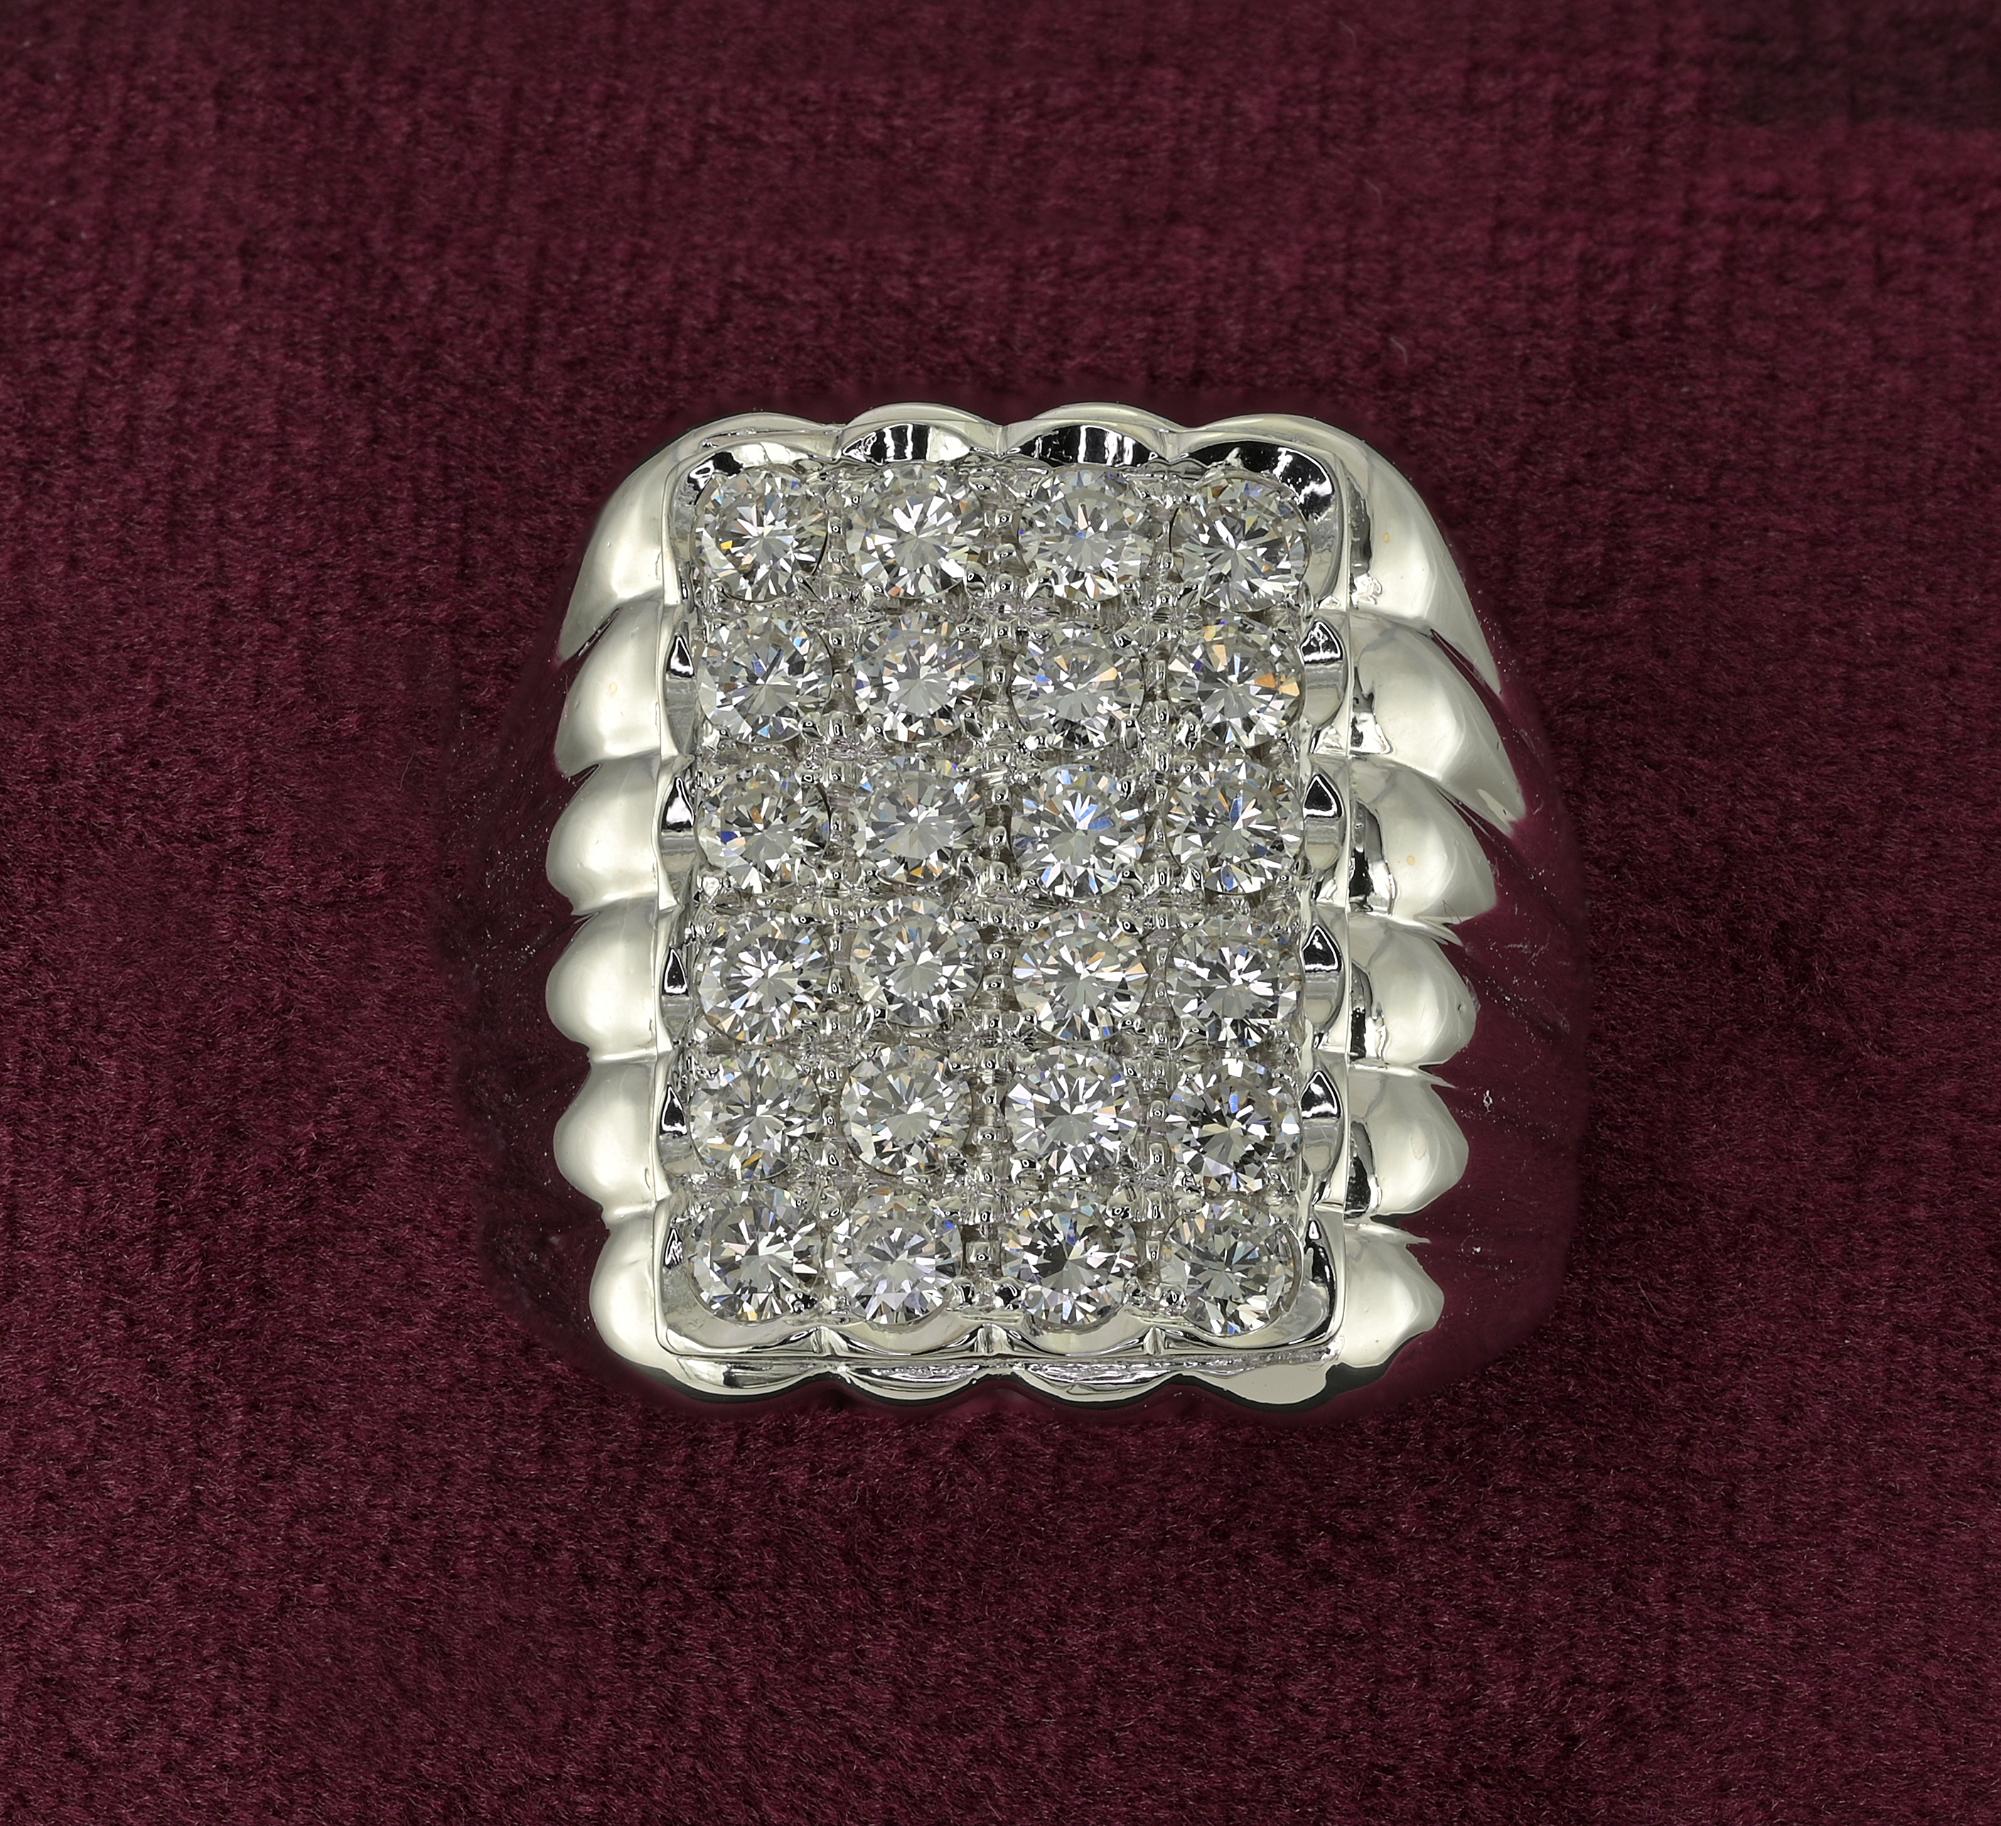 This superb mid century ring is 1950 ca
Substantially hand crafted of solid 18 Kt white gold, weighs 18.7 grams
Strong masculine character expressed in a study designed with fluted sides and rectangular Diamond panel on the front side
Diamonds are a